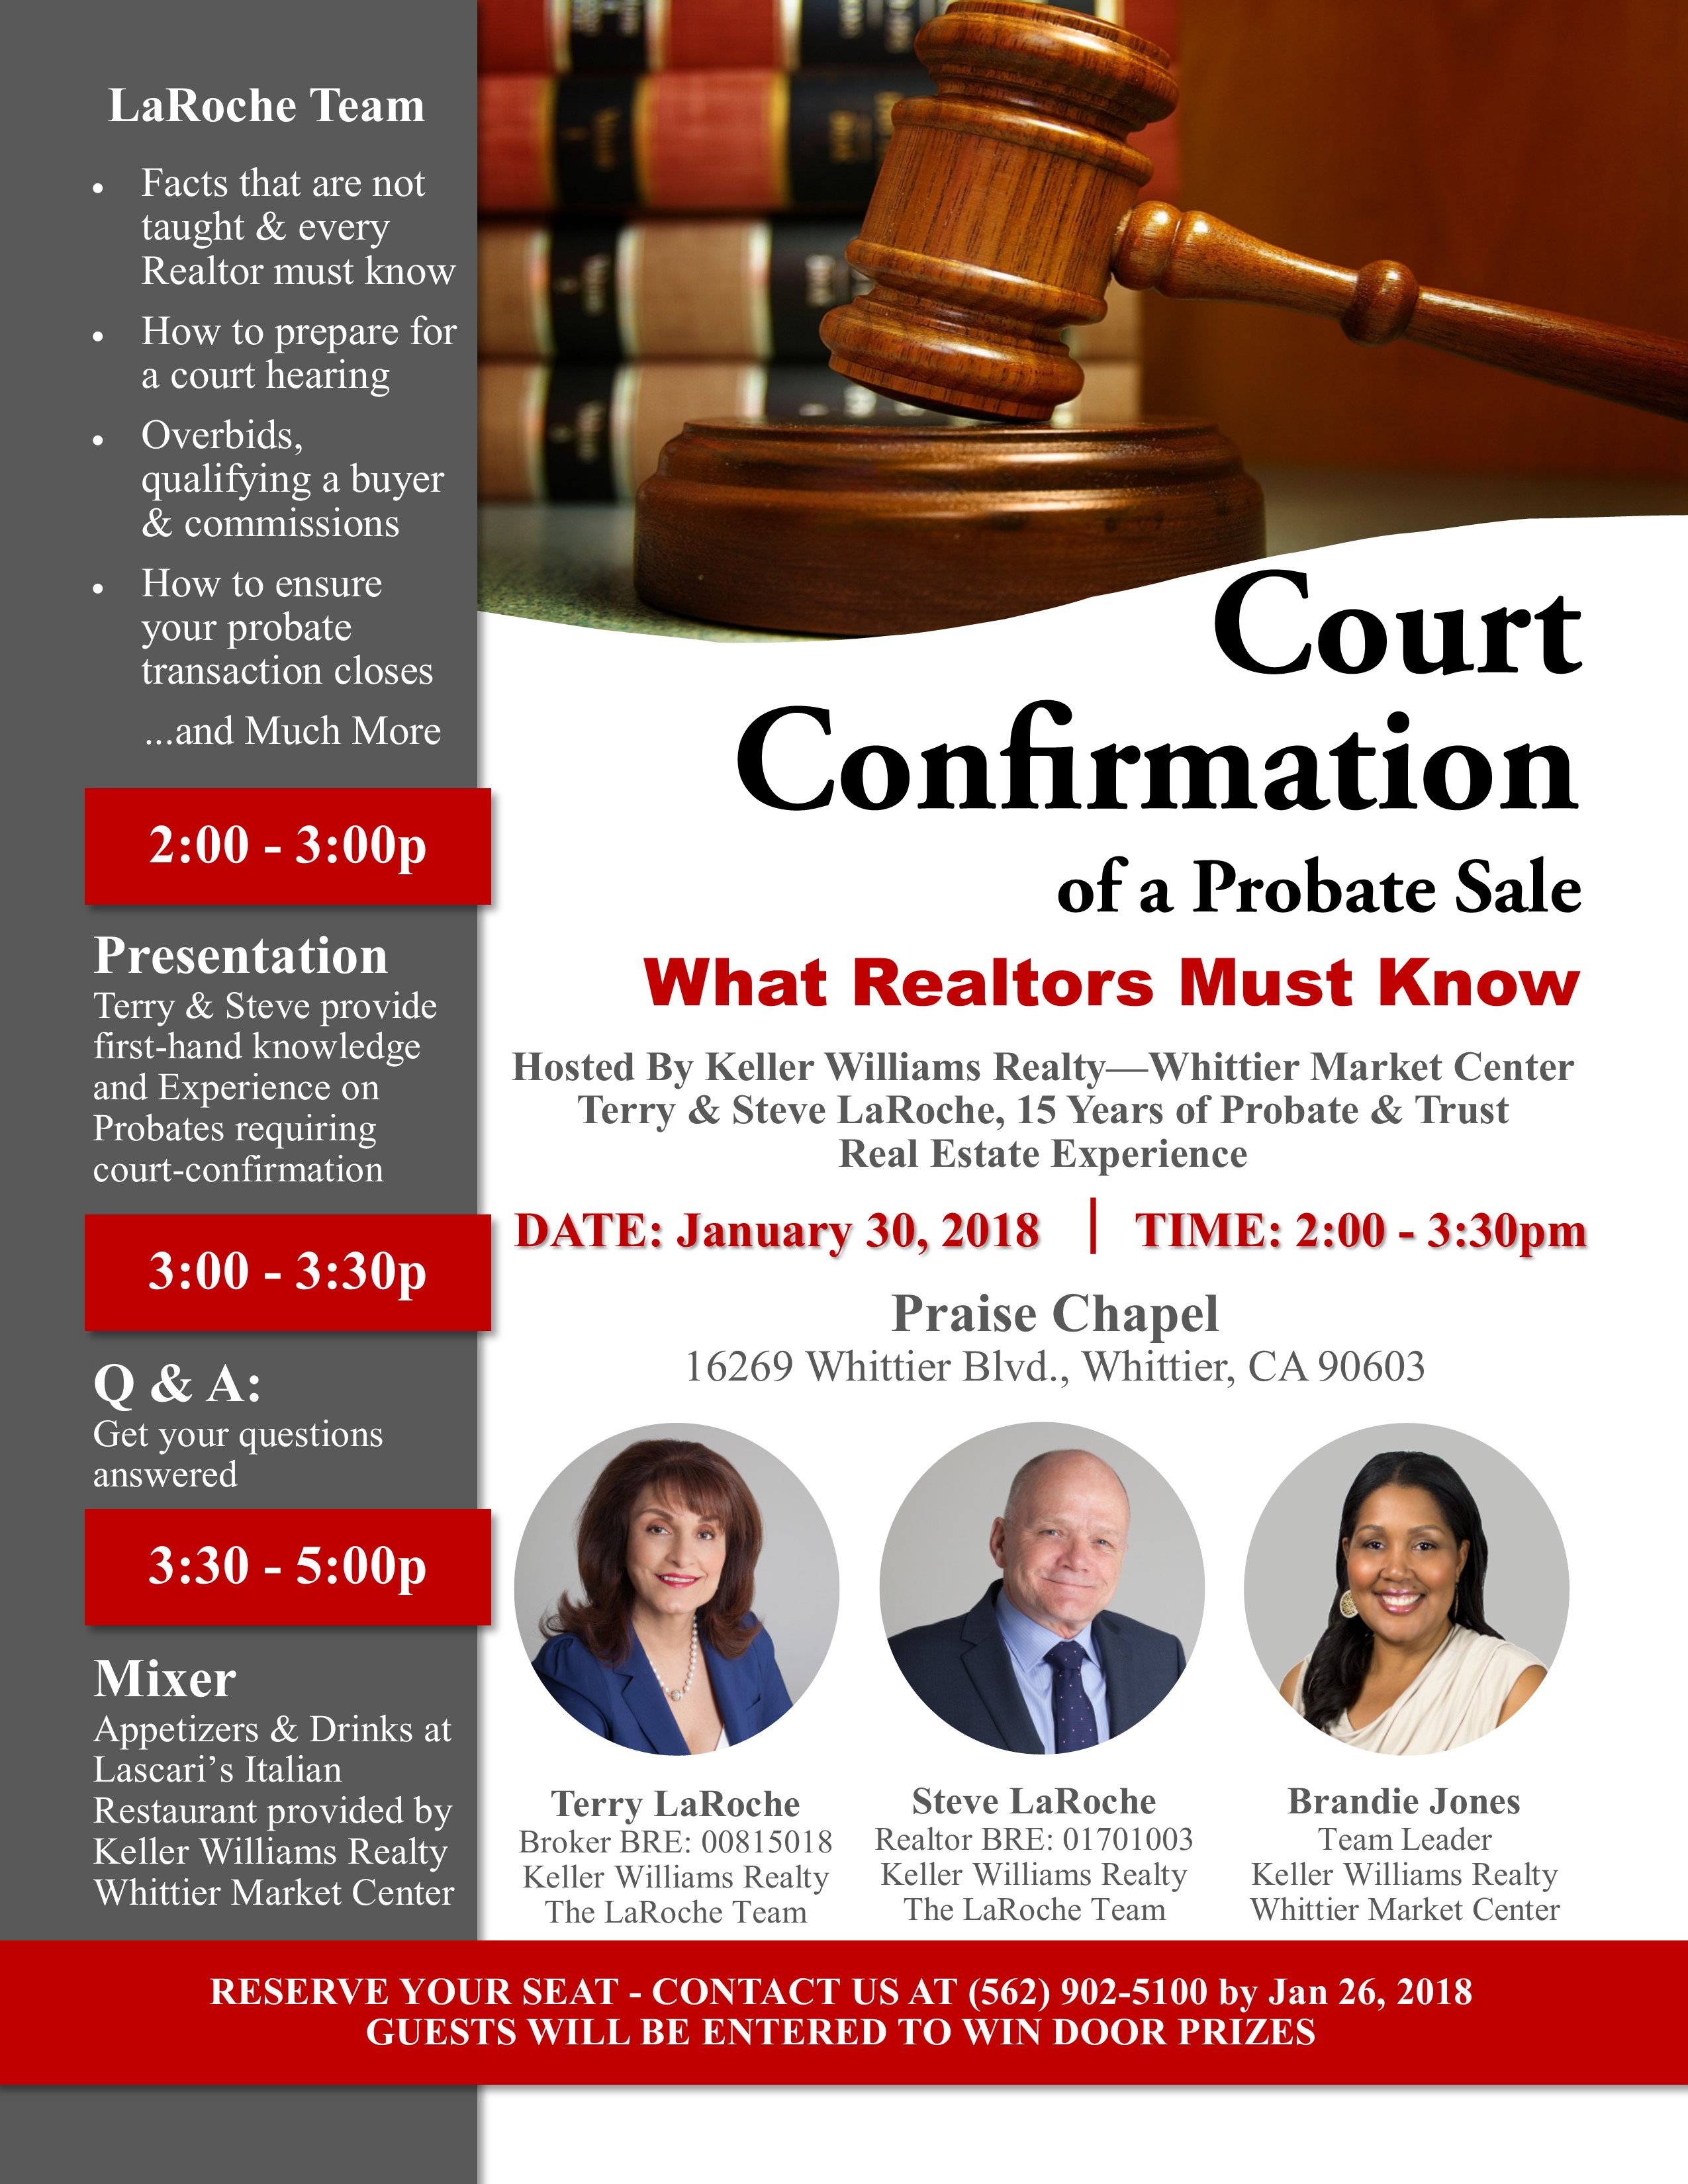 What Realtors Must Know About Court Confirmation of a Probate Sale